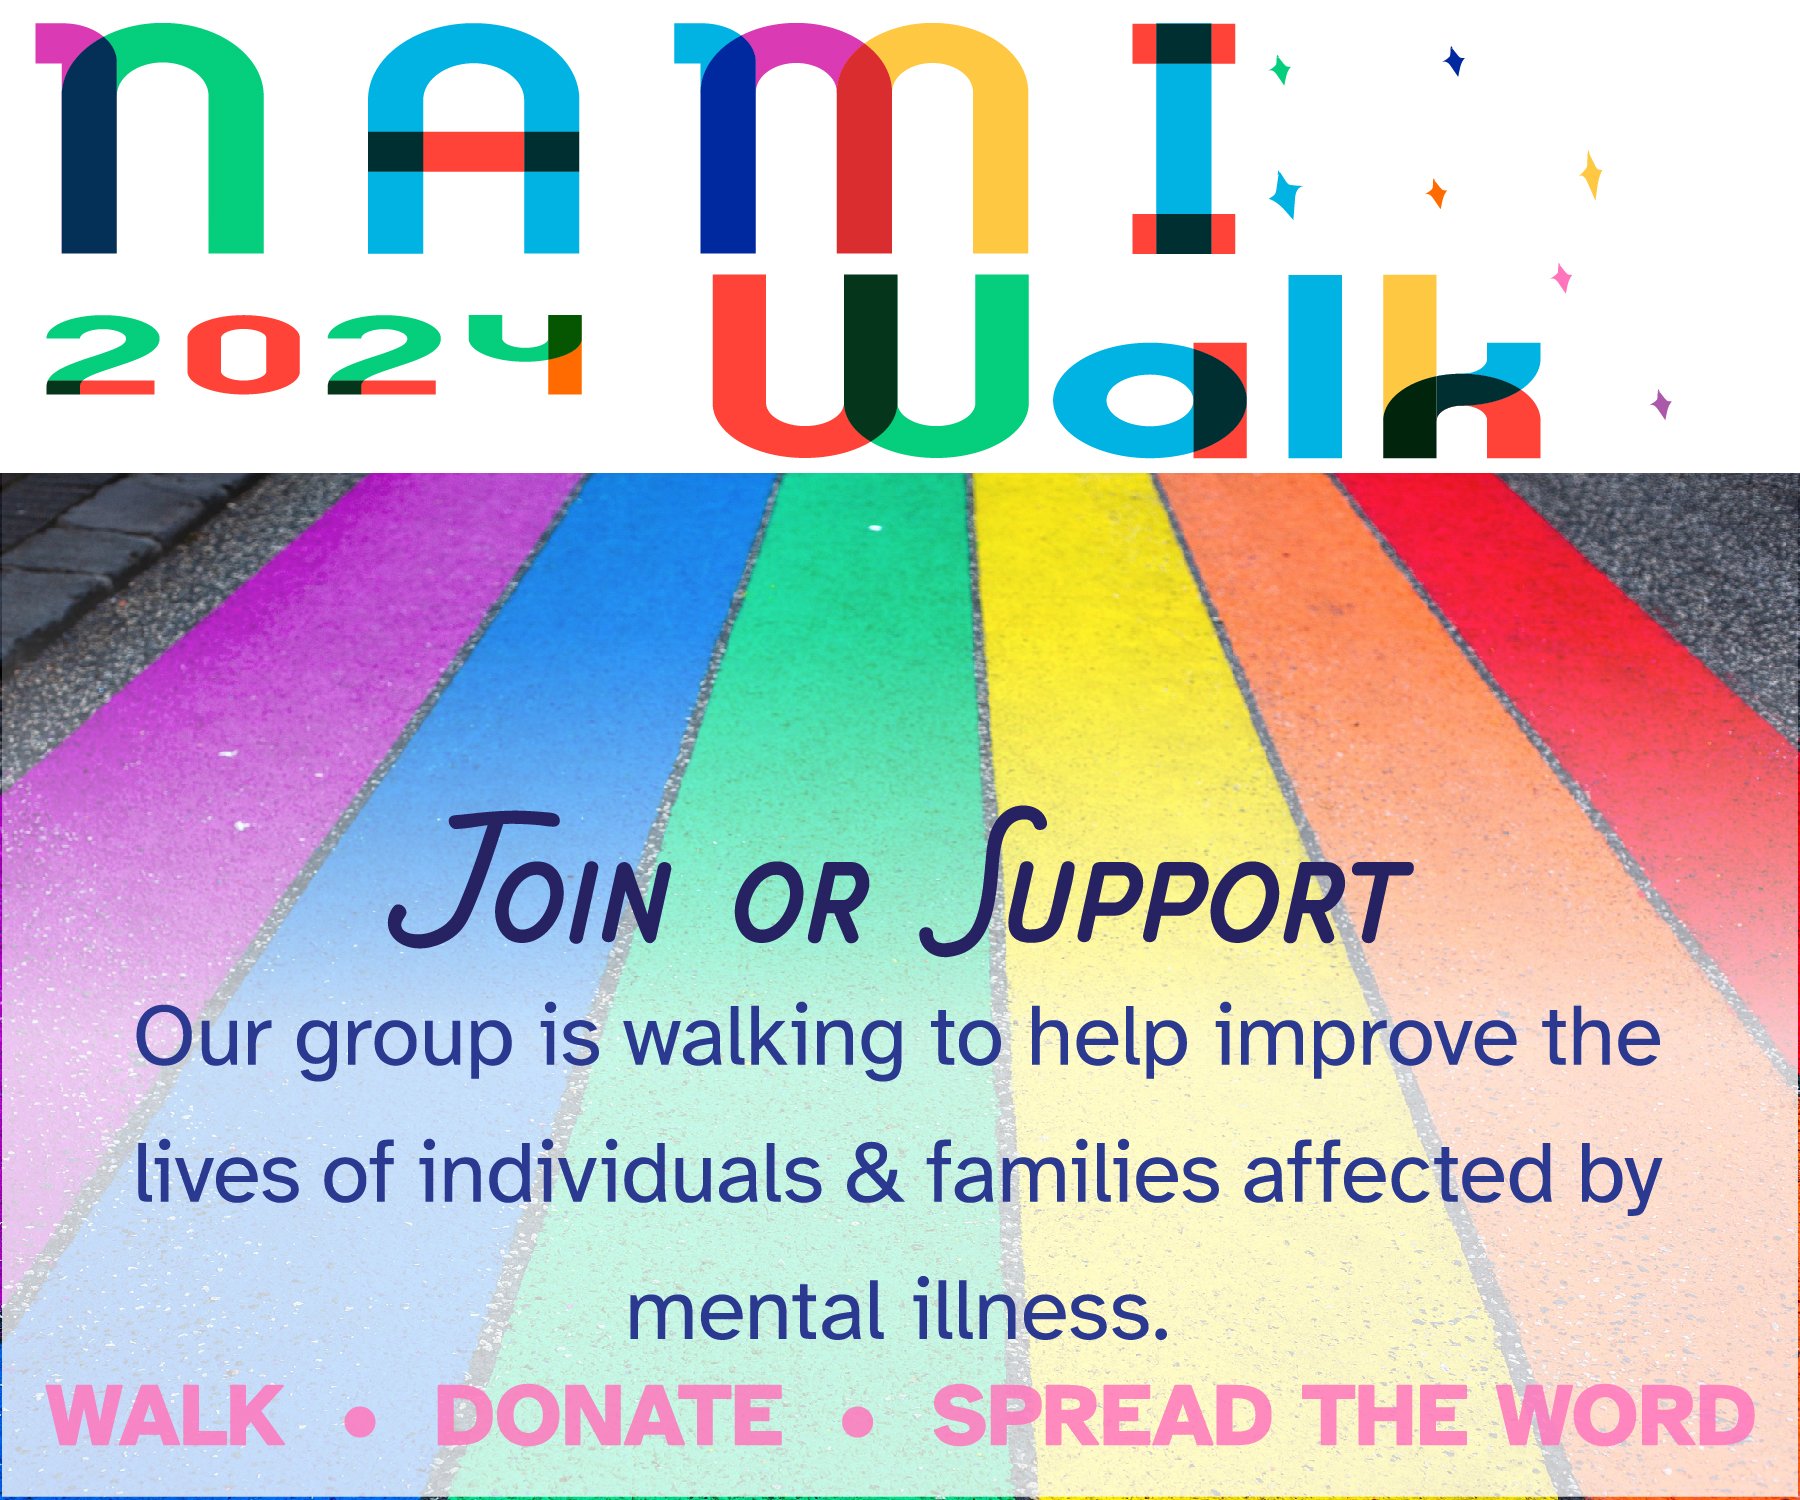 Zion's Mental Health Ministry Team is gearing up for this year's NAMI walk! 💙💛This Saturday, May 4th at Terry Trueblood Rec Area (579 McCollister Blvd, Iowa City). We will gather at 9AM &amp; walk at 10AM. ✨ Join in or At Least Support:
https://www